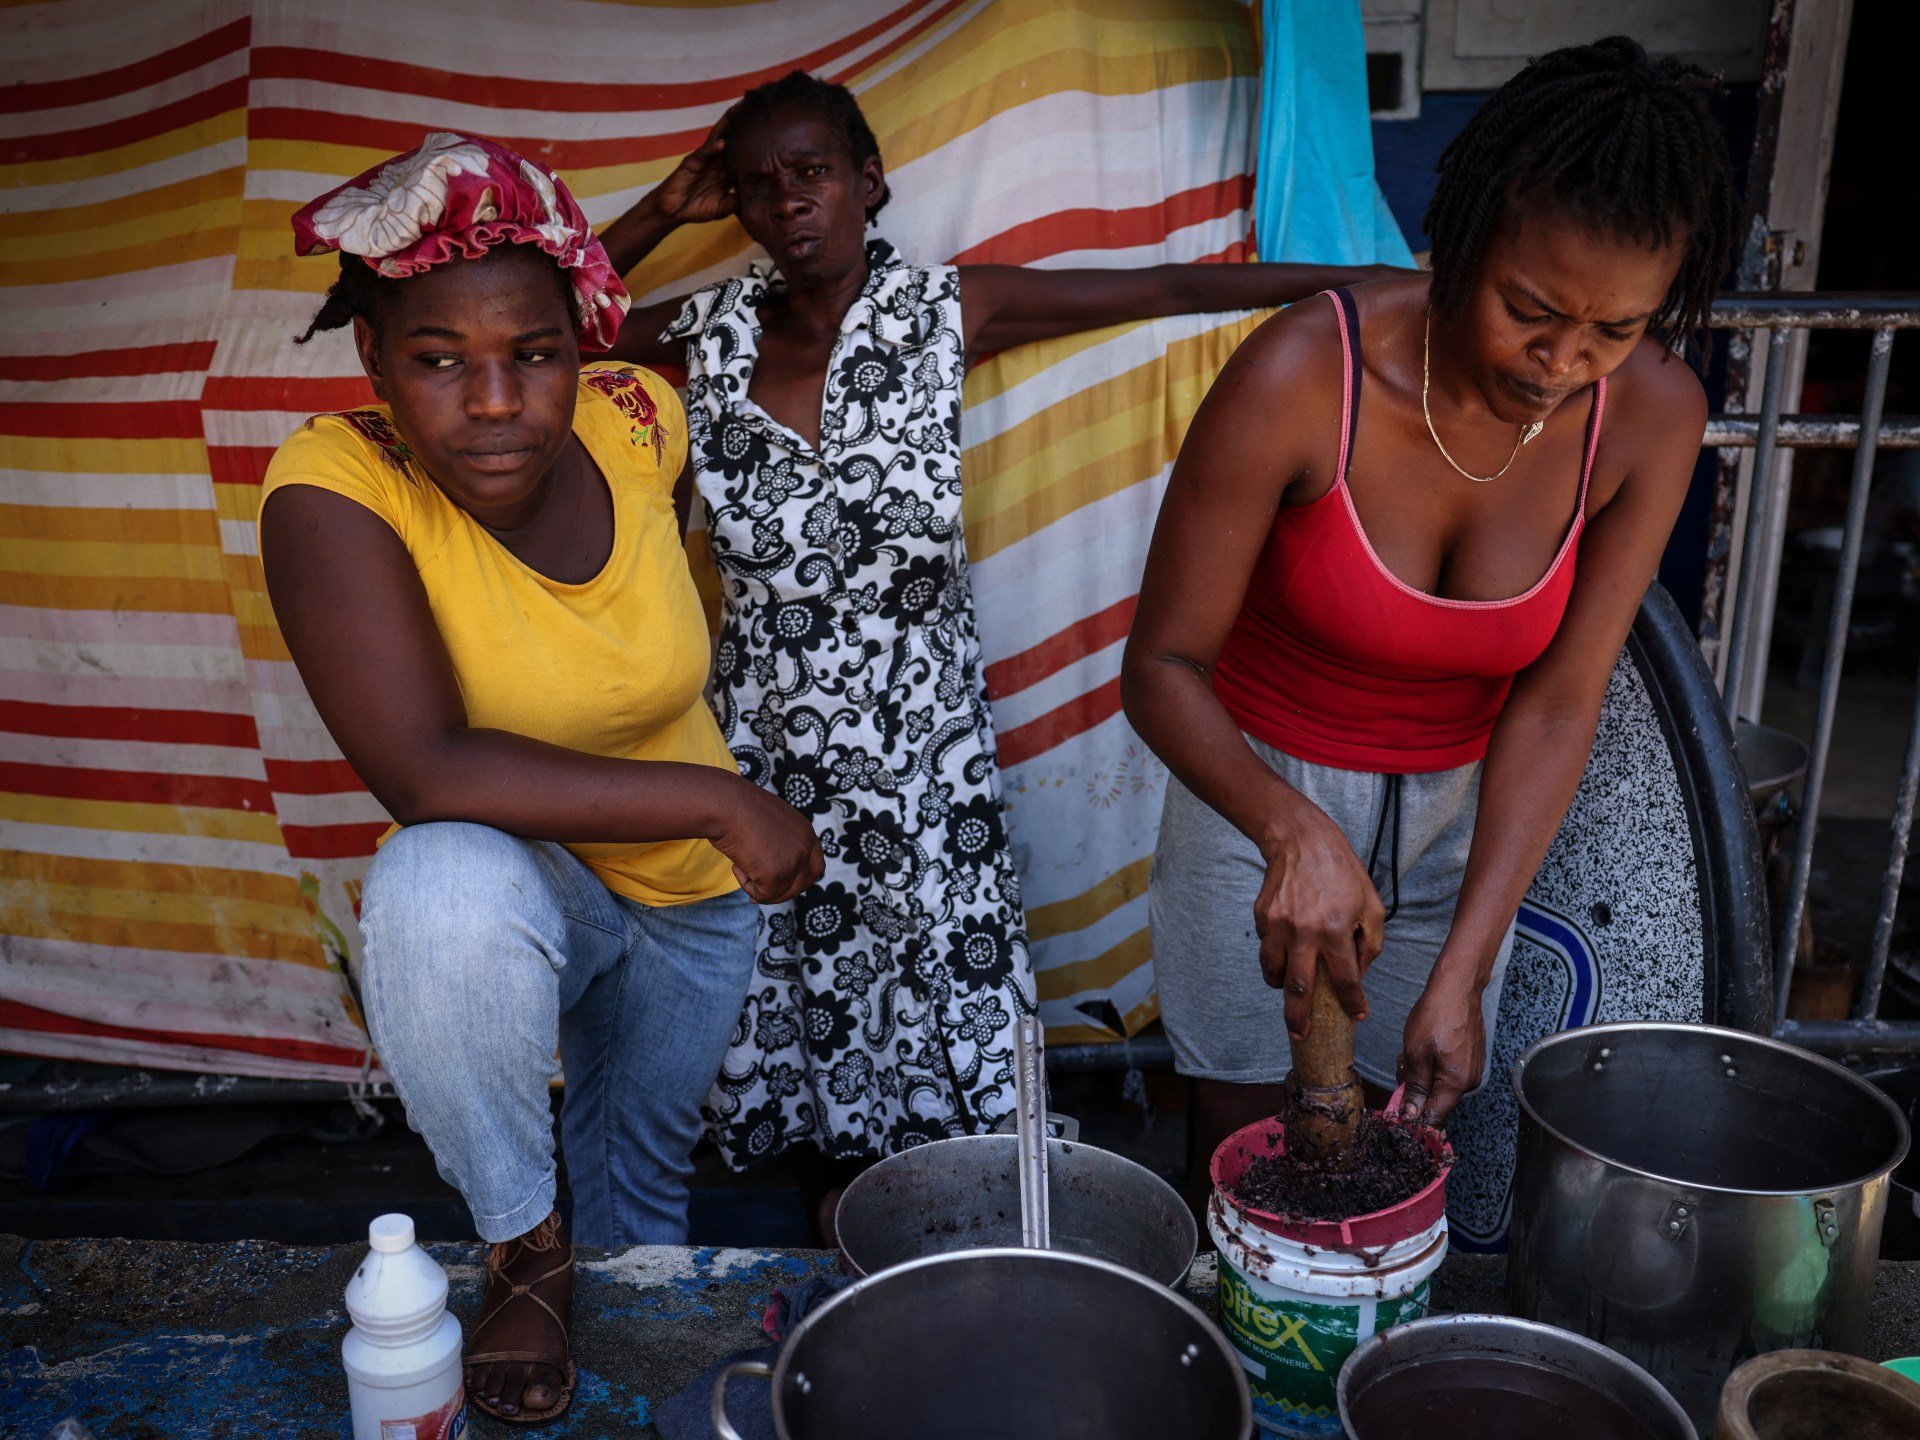 Haitian women and girls face ‘alarming’ violence in displacement camps: UN